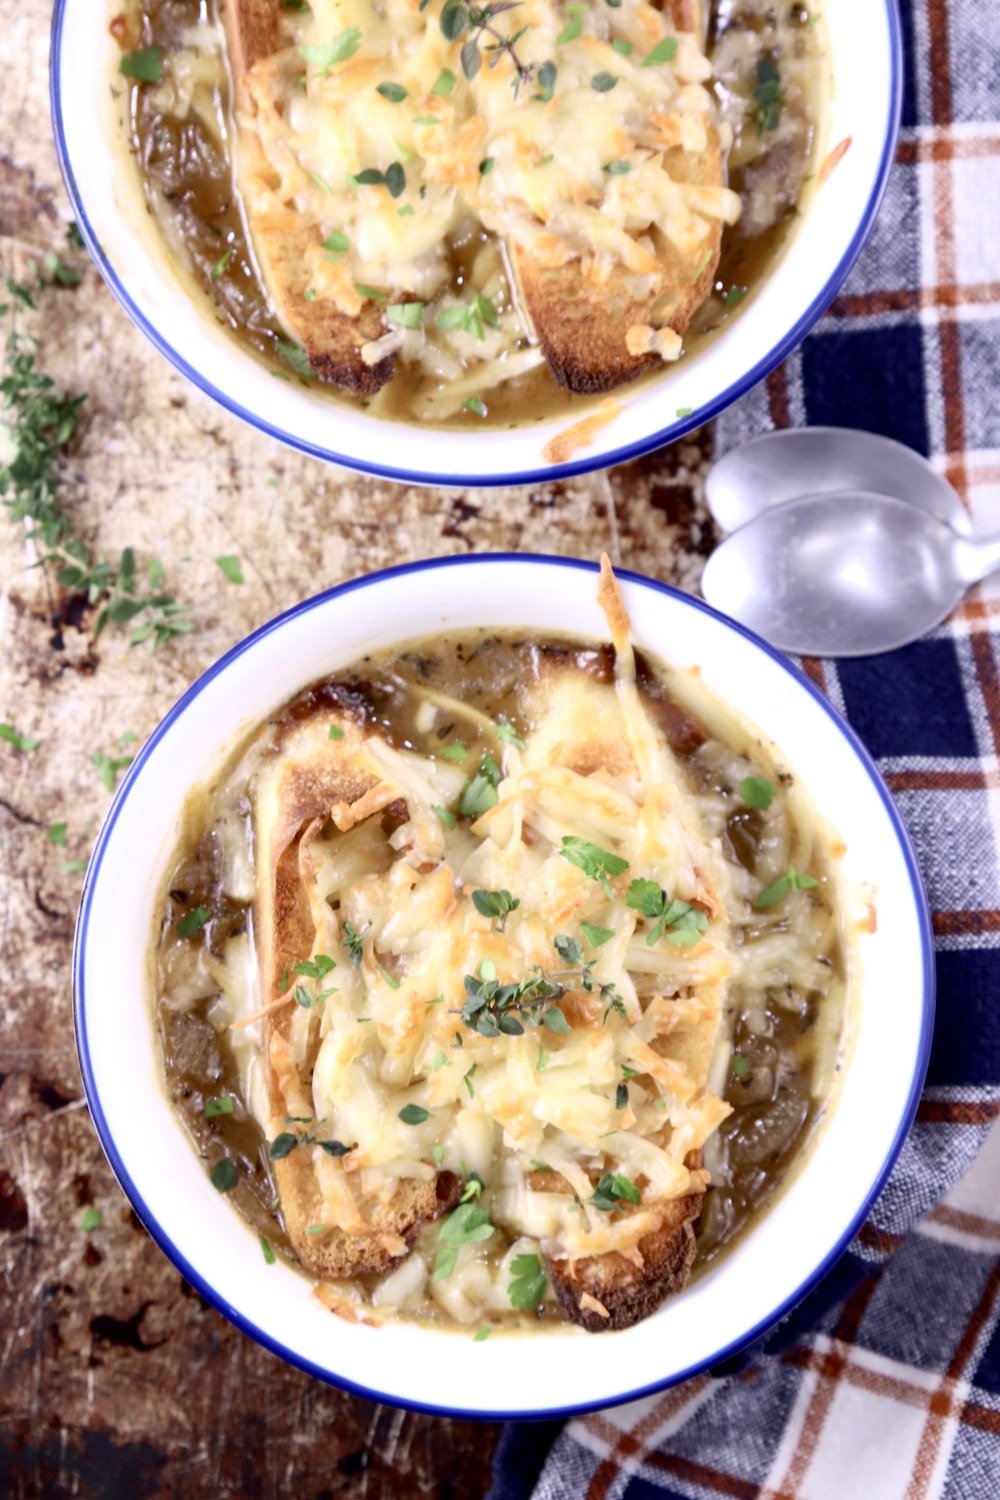 French Onion Soup - 2 bowls topped with melted cheese bread and herbs